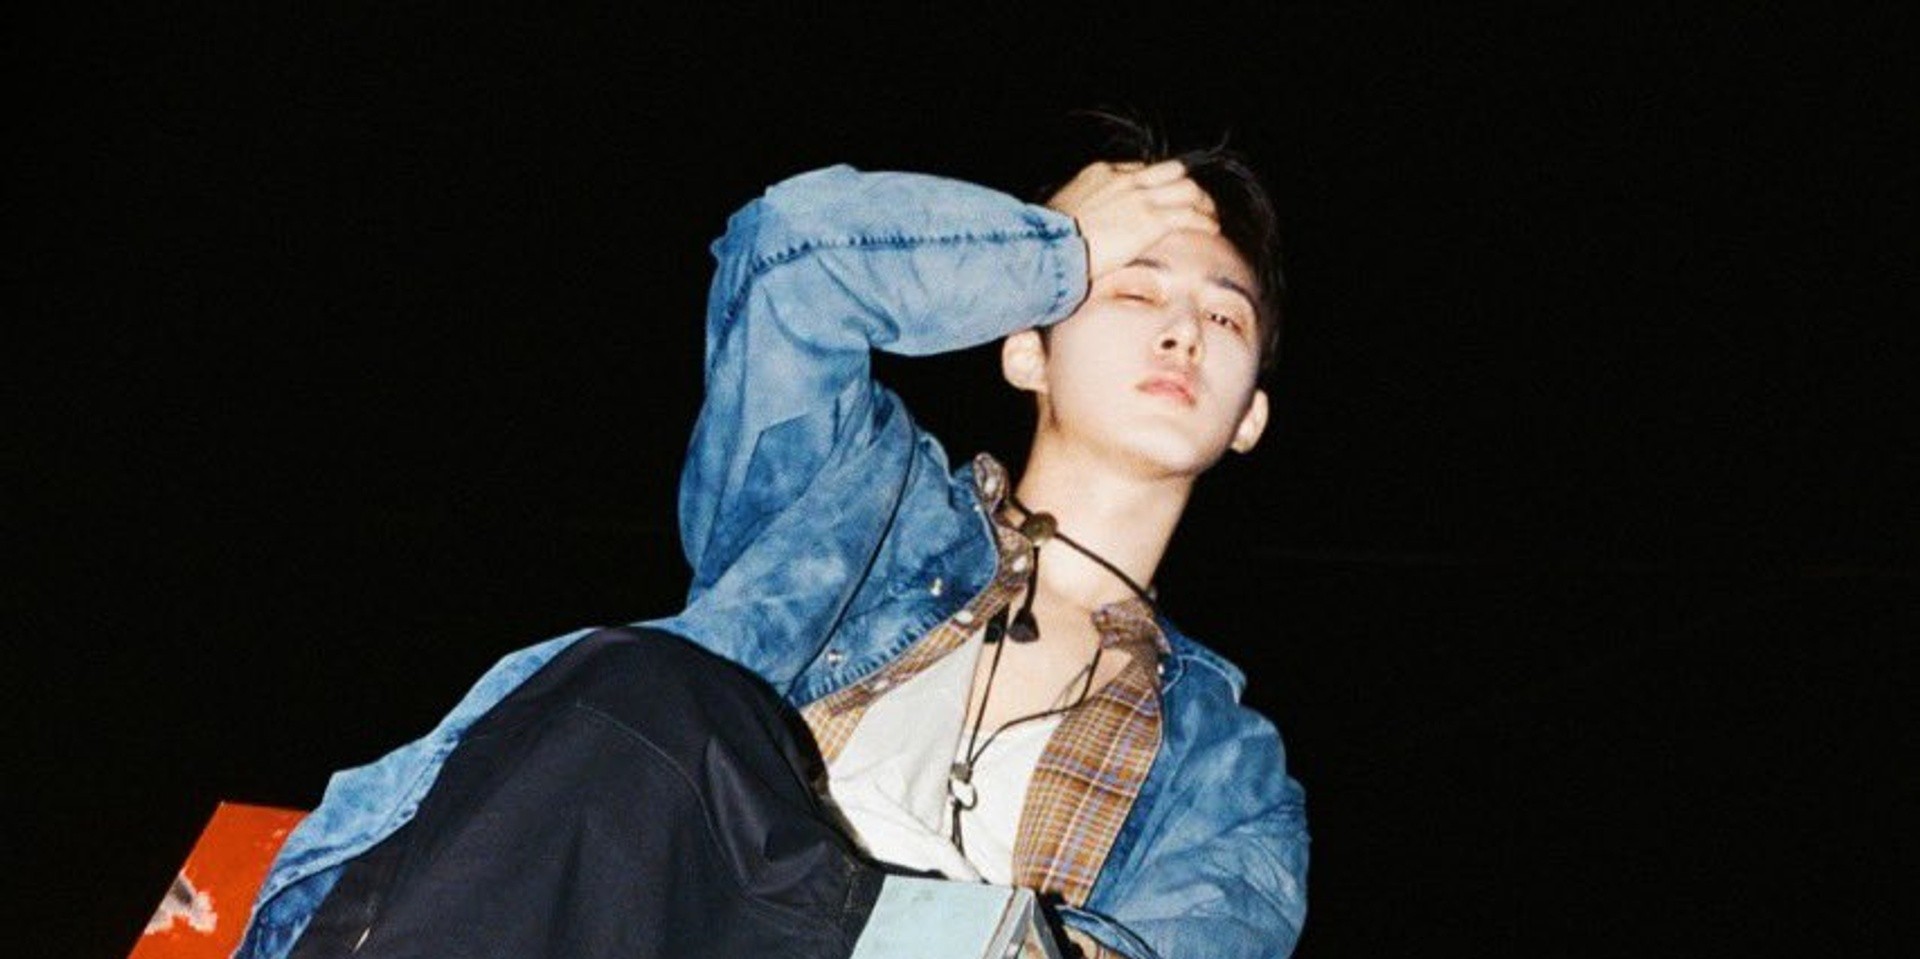 B.I pours out his heart and soul in his debut solo album 'WATERFALL' – listen